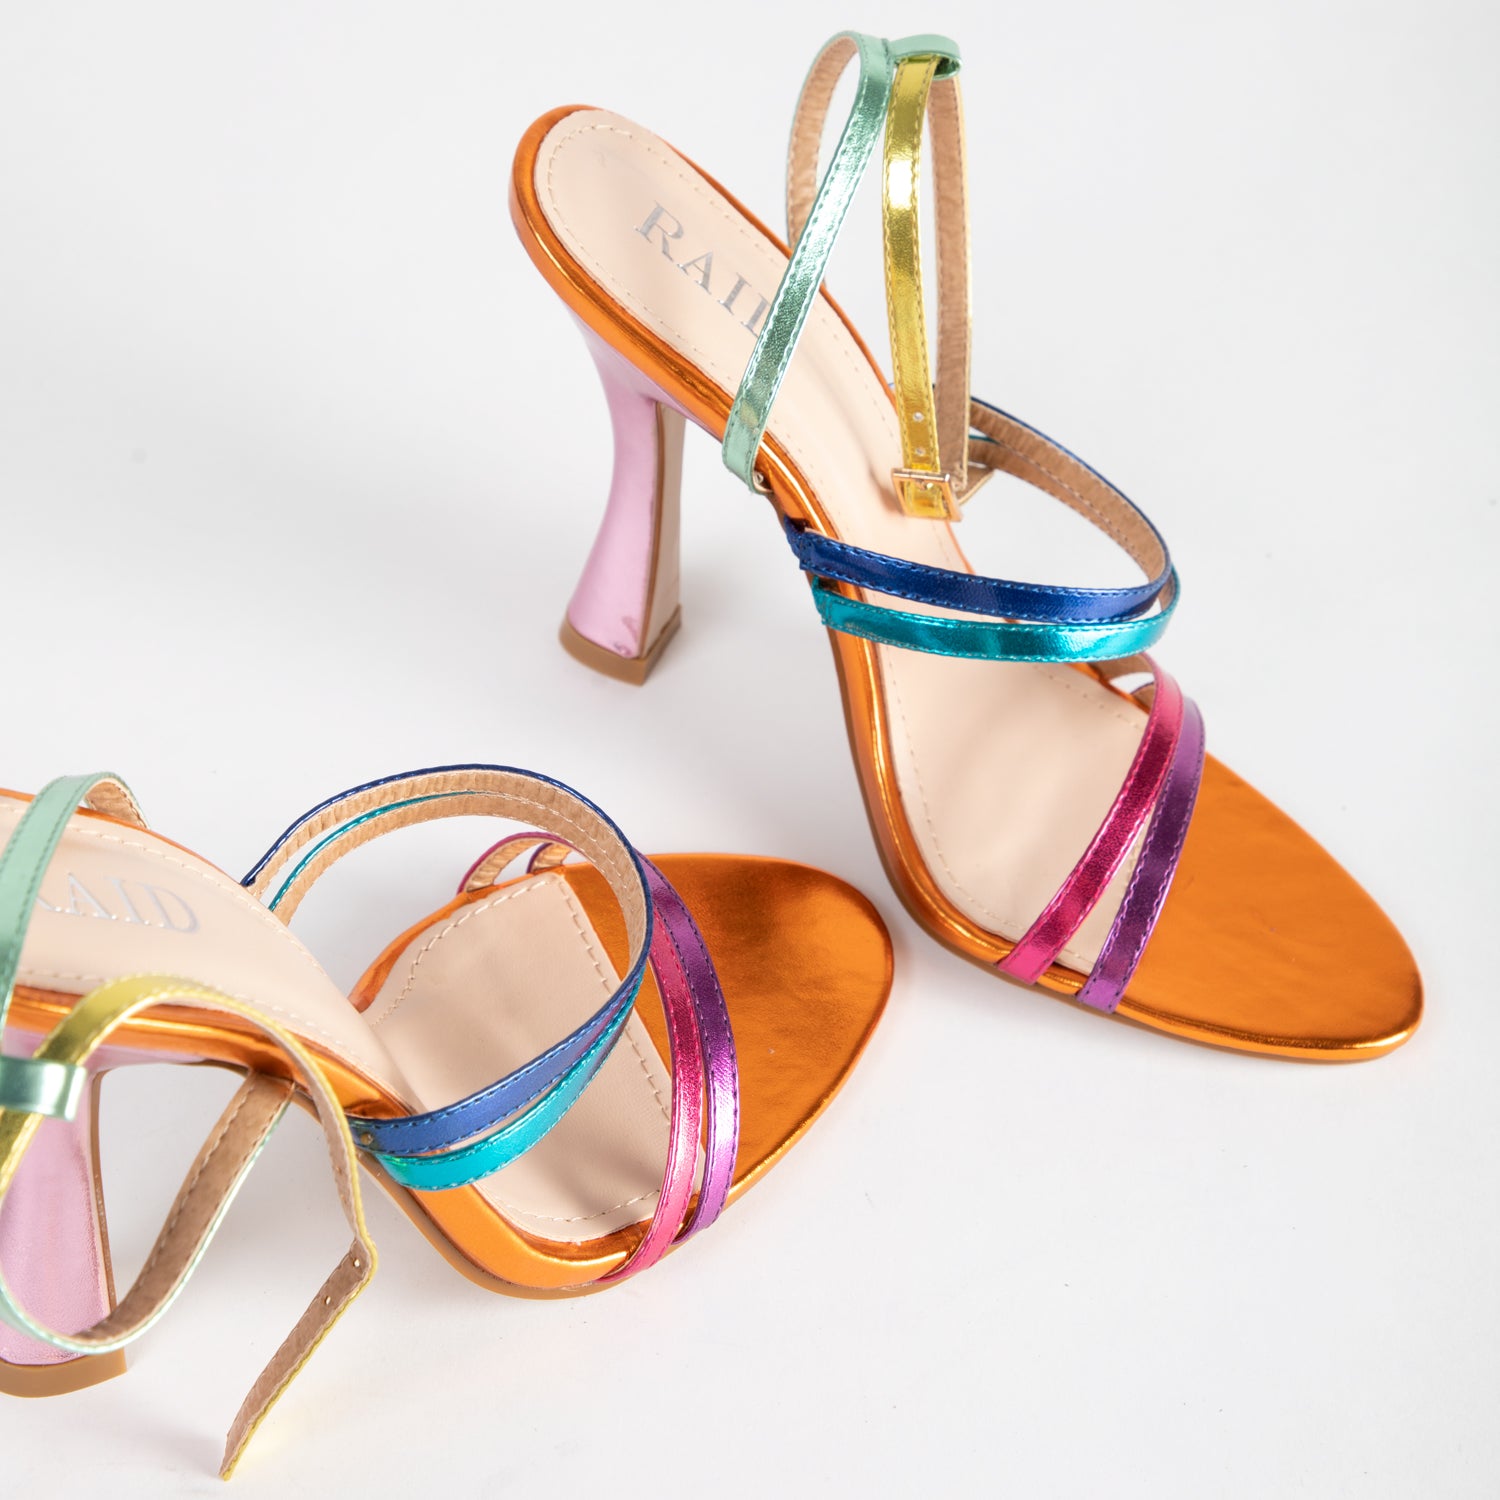 RAID Inesse Strappy Heel in Multi